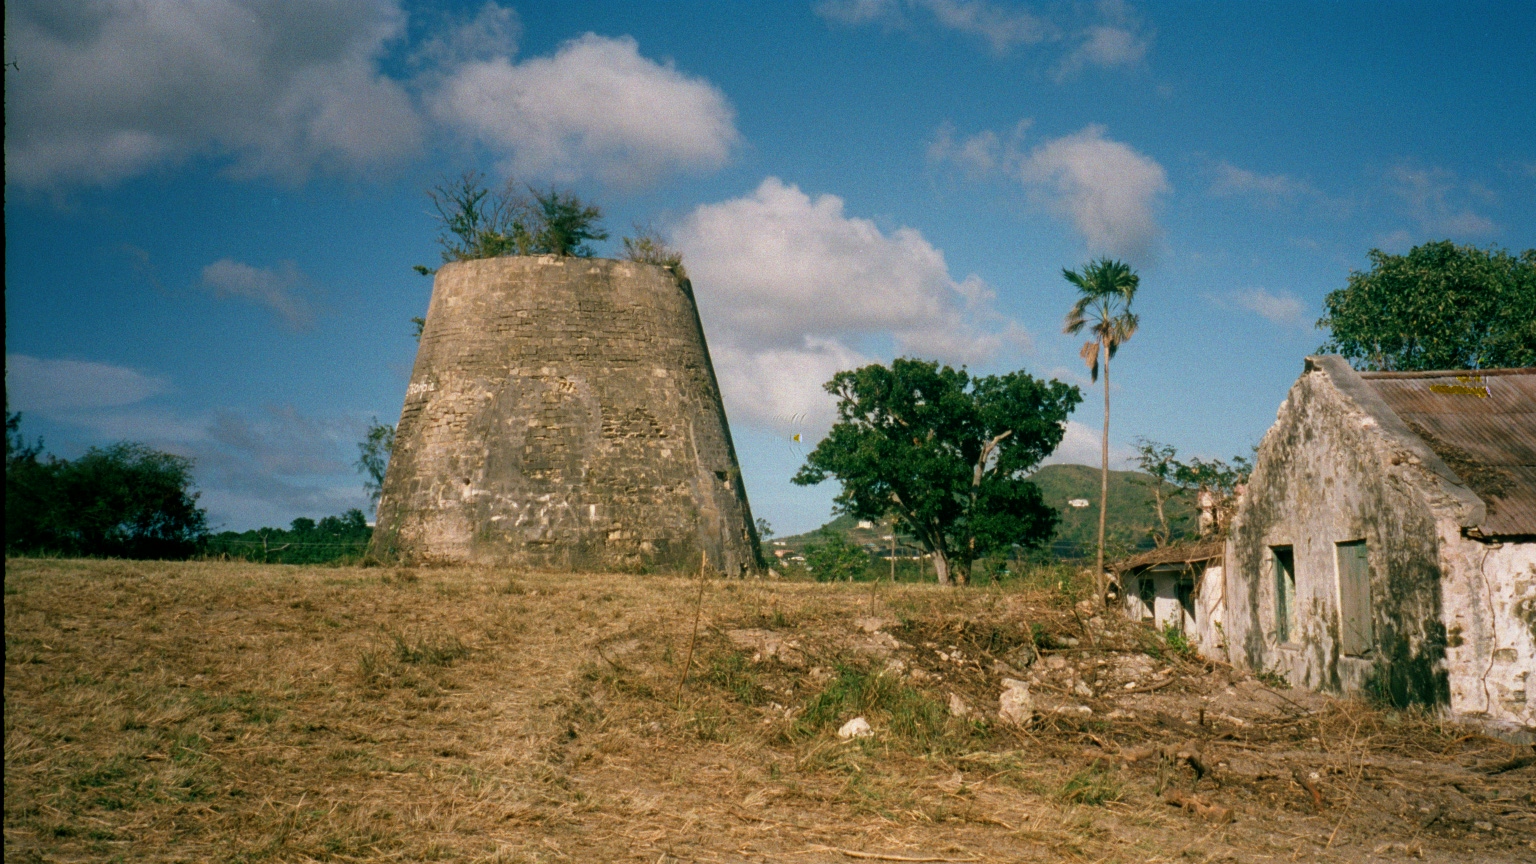 The 18th century sugar mill and other ruins of Estate Anna’s Hope, named after Anna Heyliger. (Photo by Olasee Davis)